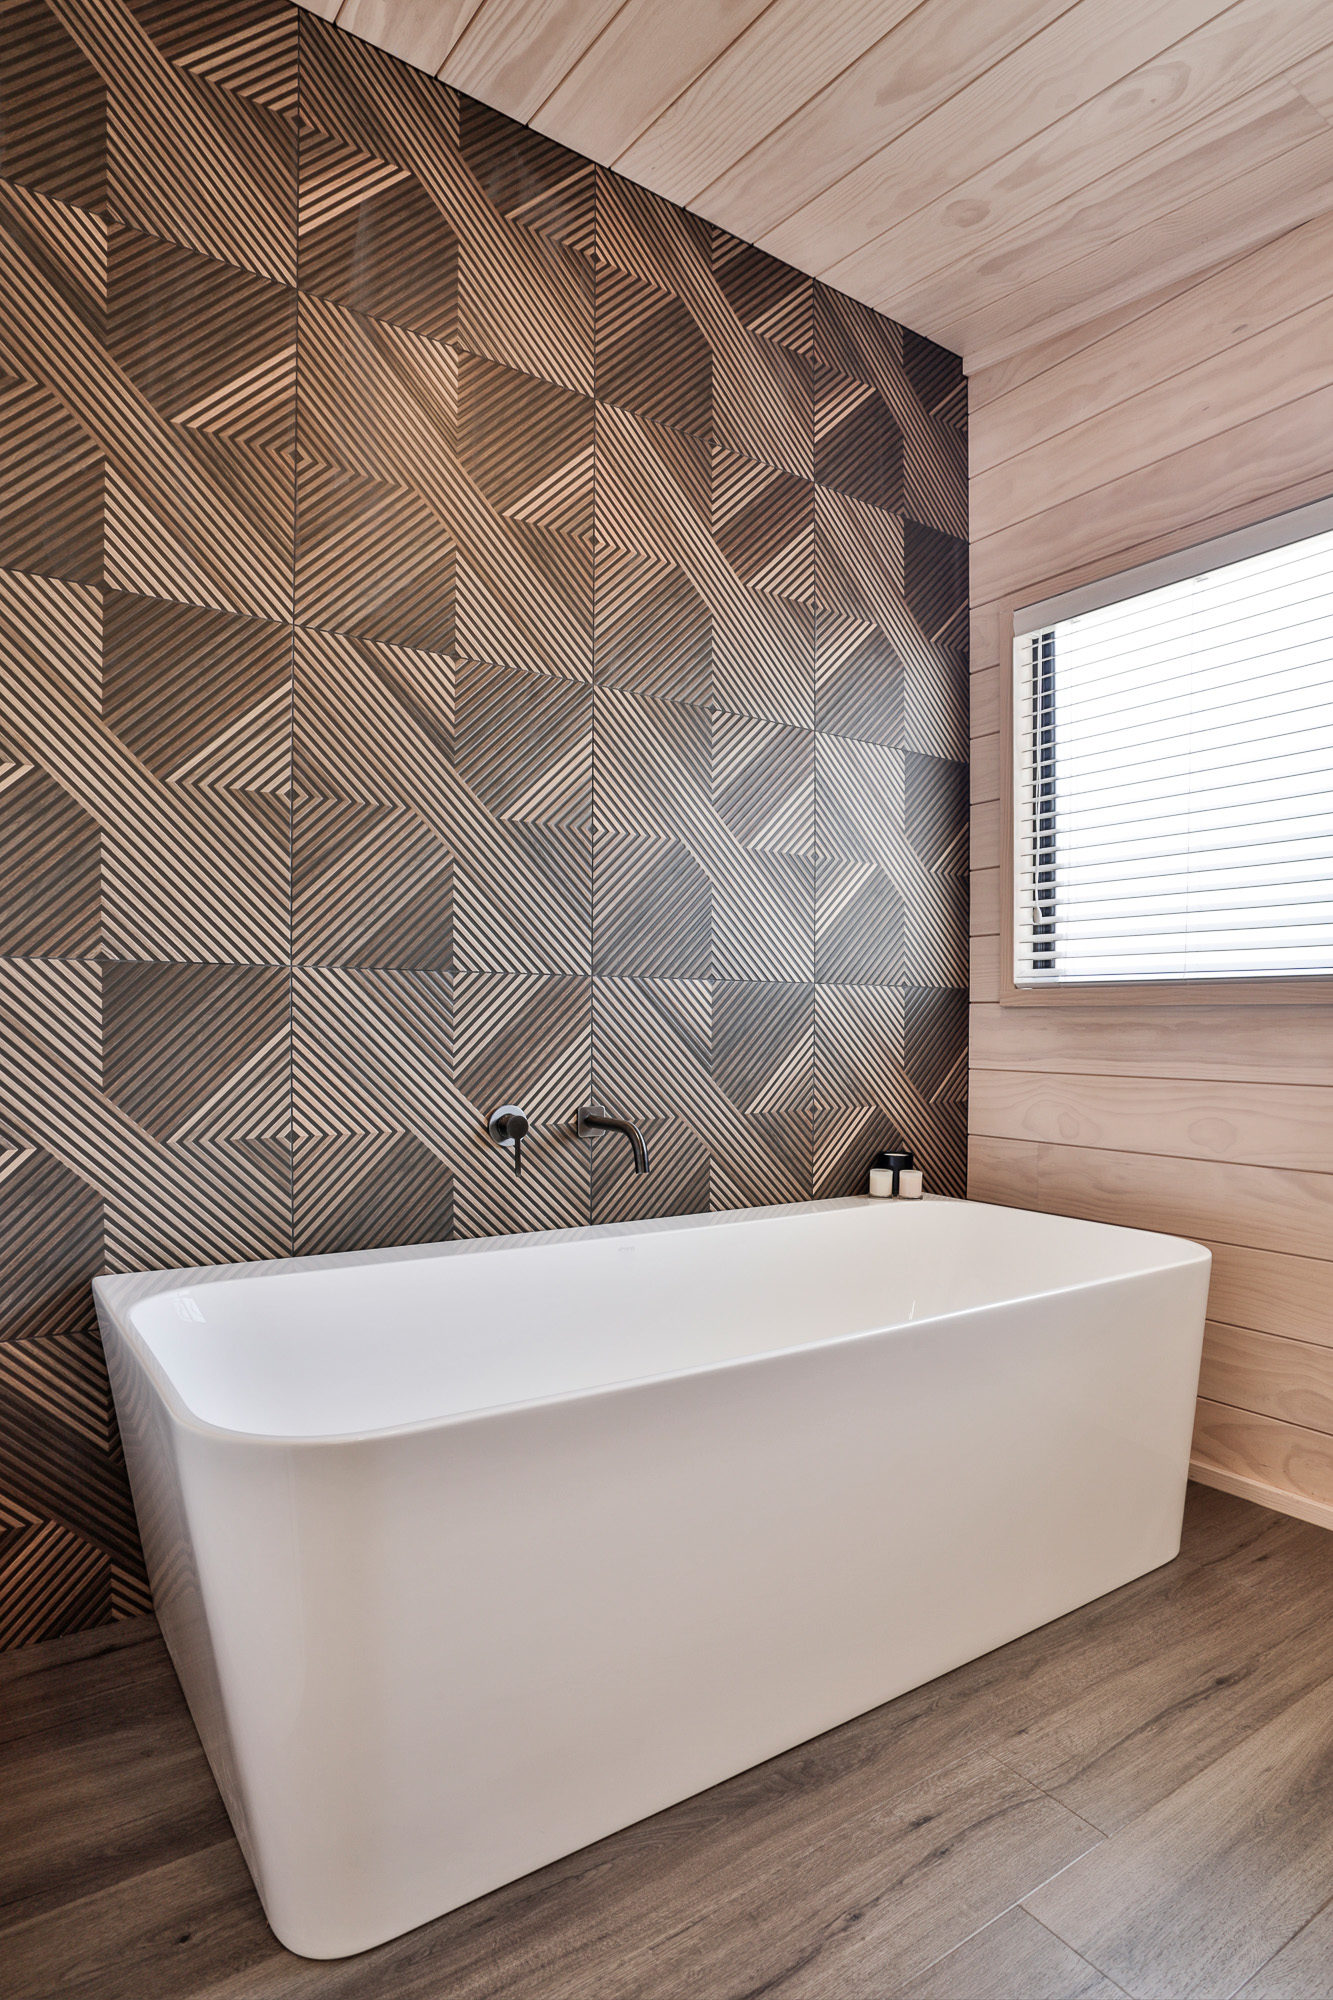 Stunning tiled feature wall in bronze Lockwood show home Wellington